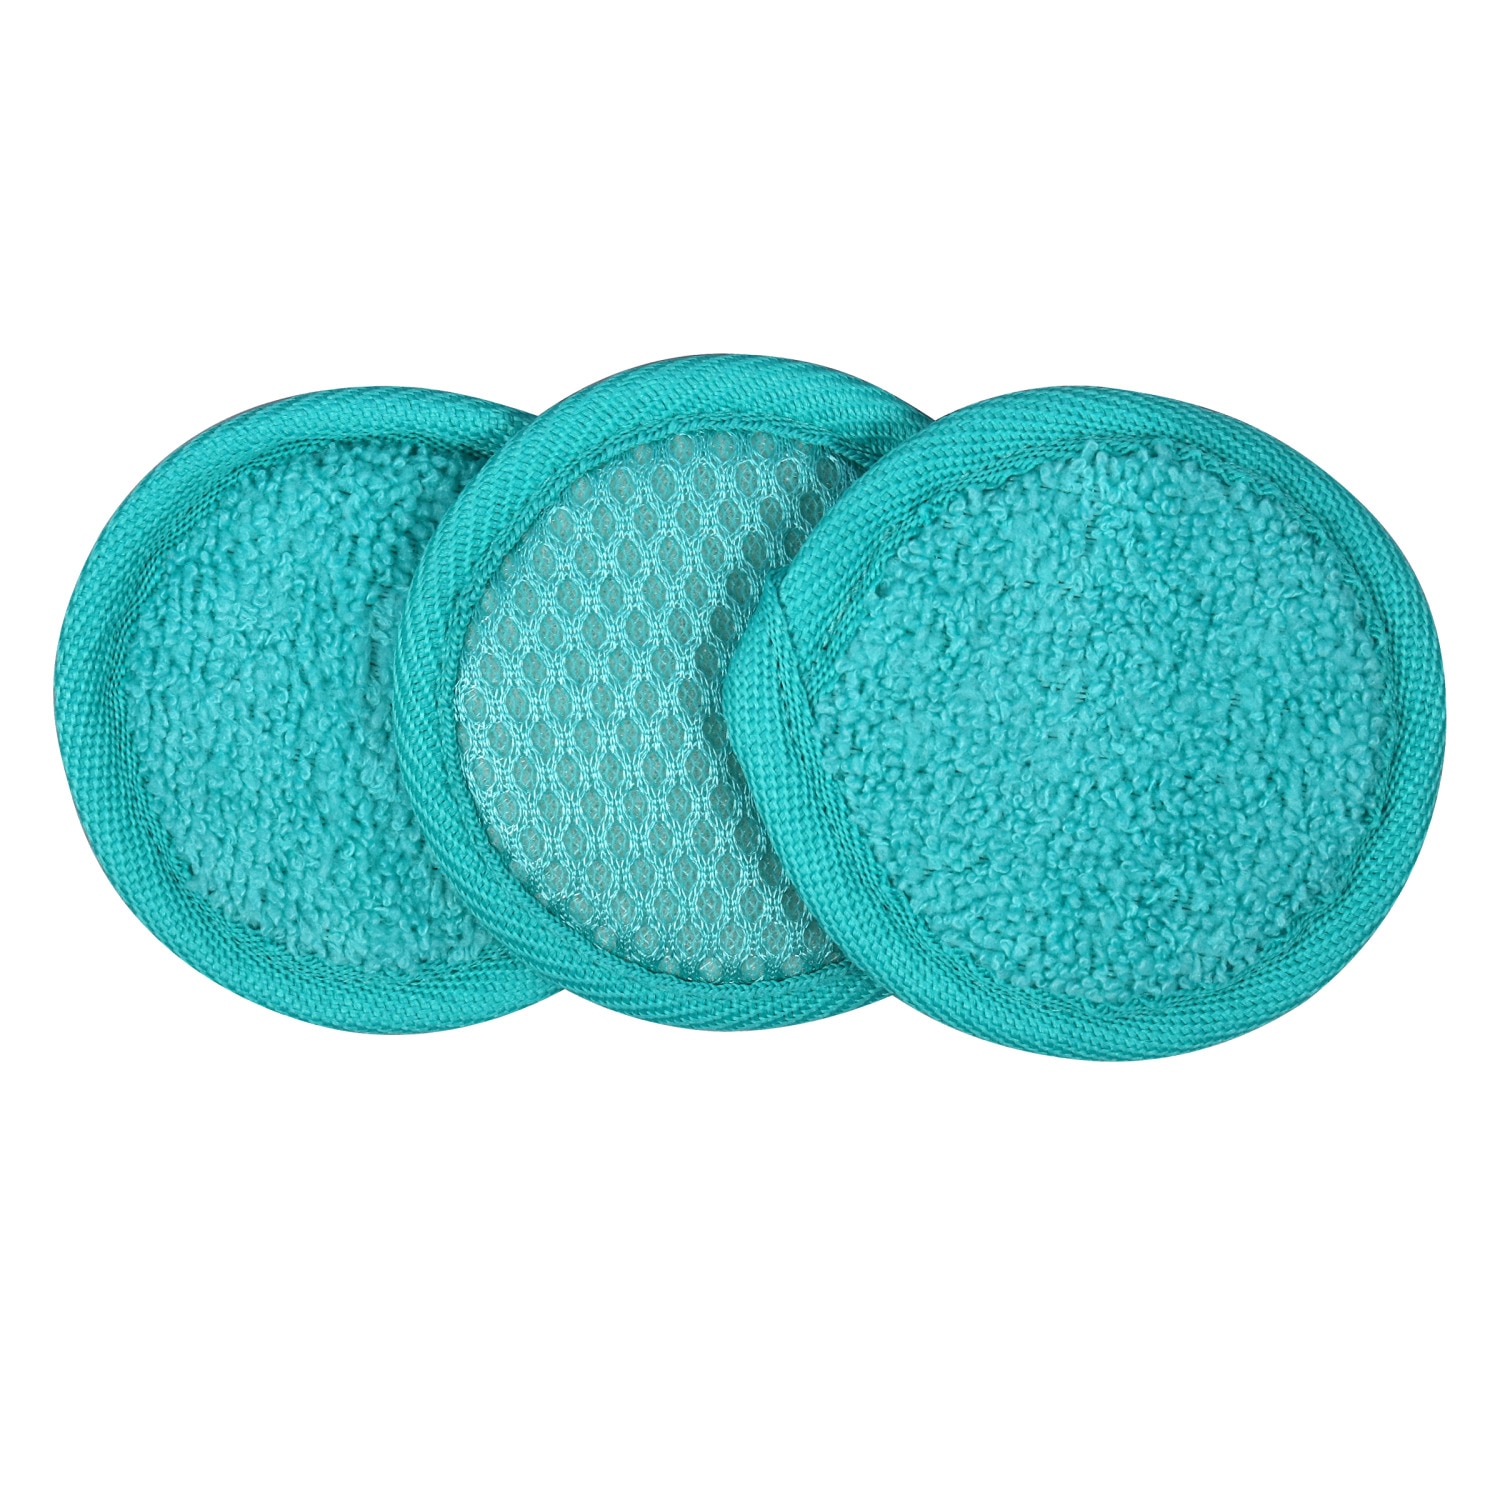 Face Scrubber - Facial Cleansing Brush Microfiber Spa Facial Scrubbers, 6 units - Teal - image 1 of 1